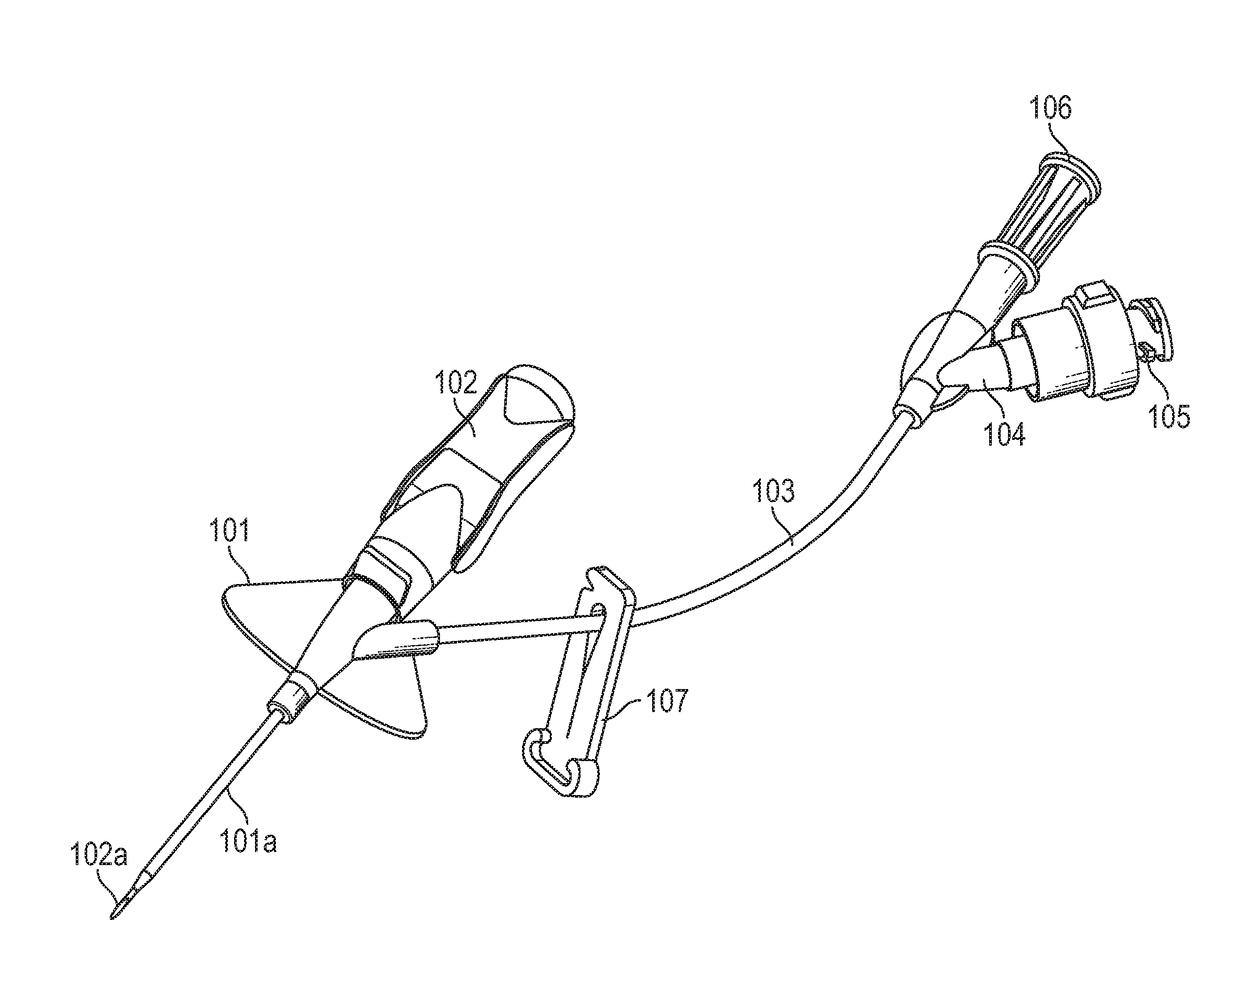 Closed iv access device with paddle grip needle hub and flash chamber